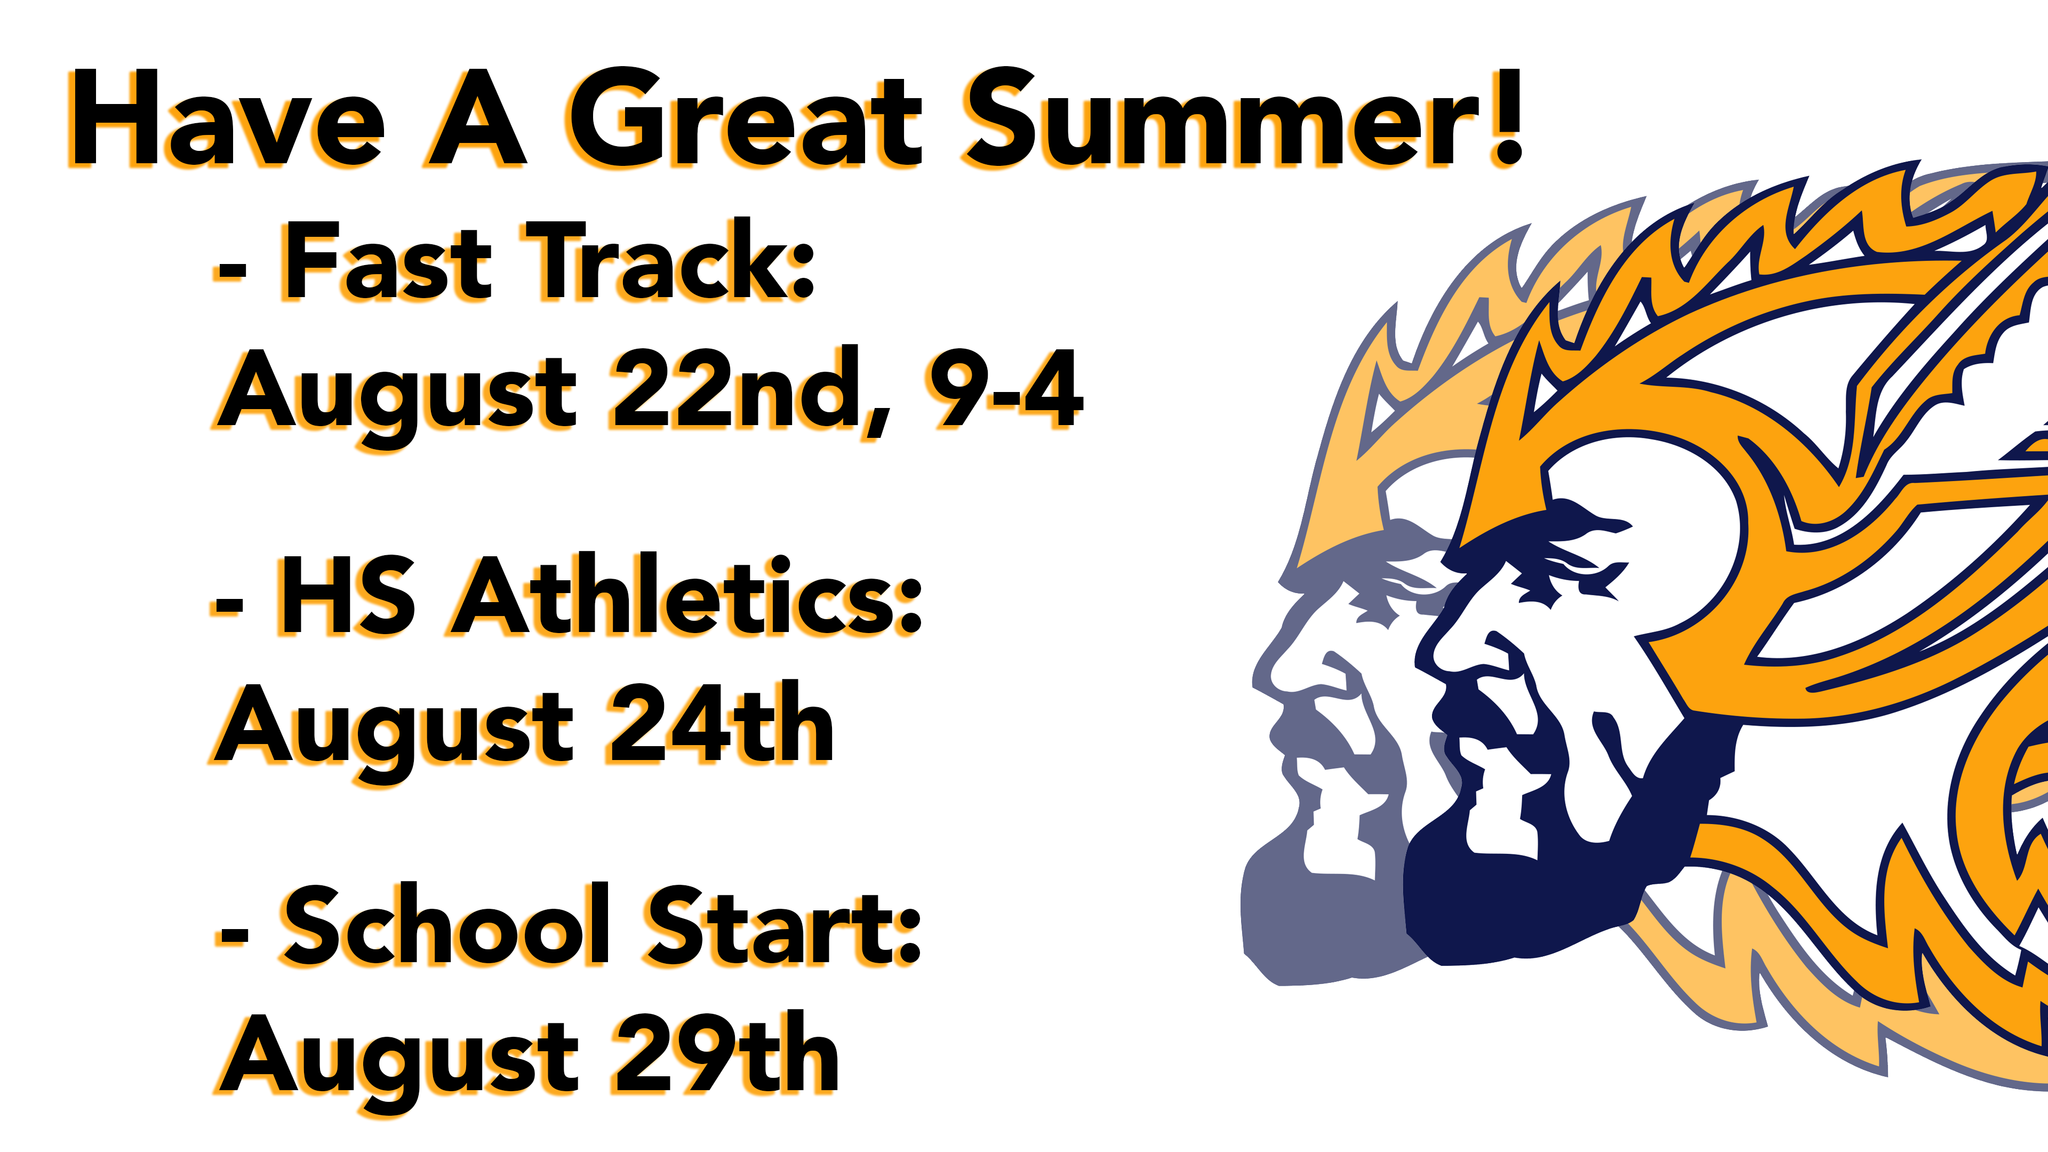 Have a Great Summer! Fast Track August 22, 9-4. HS Athletics August 24th, School Starts August 29th